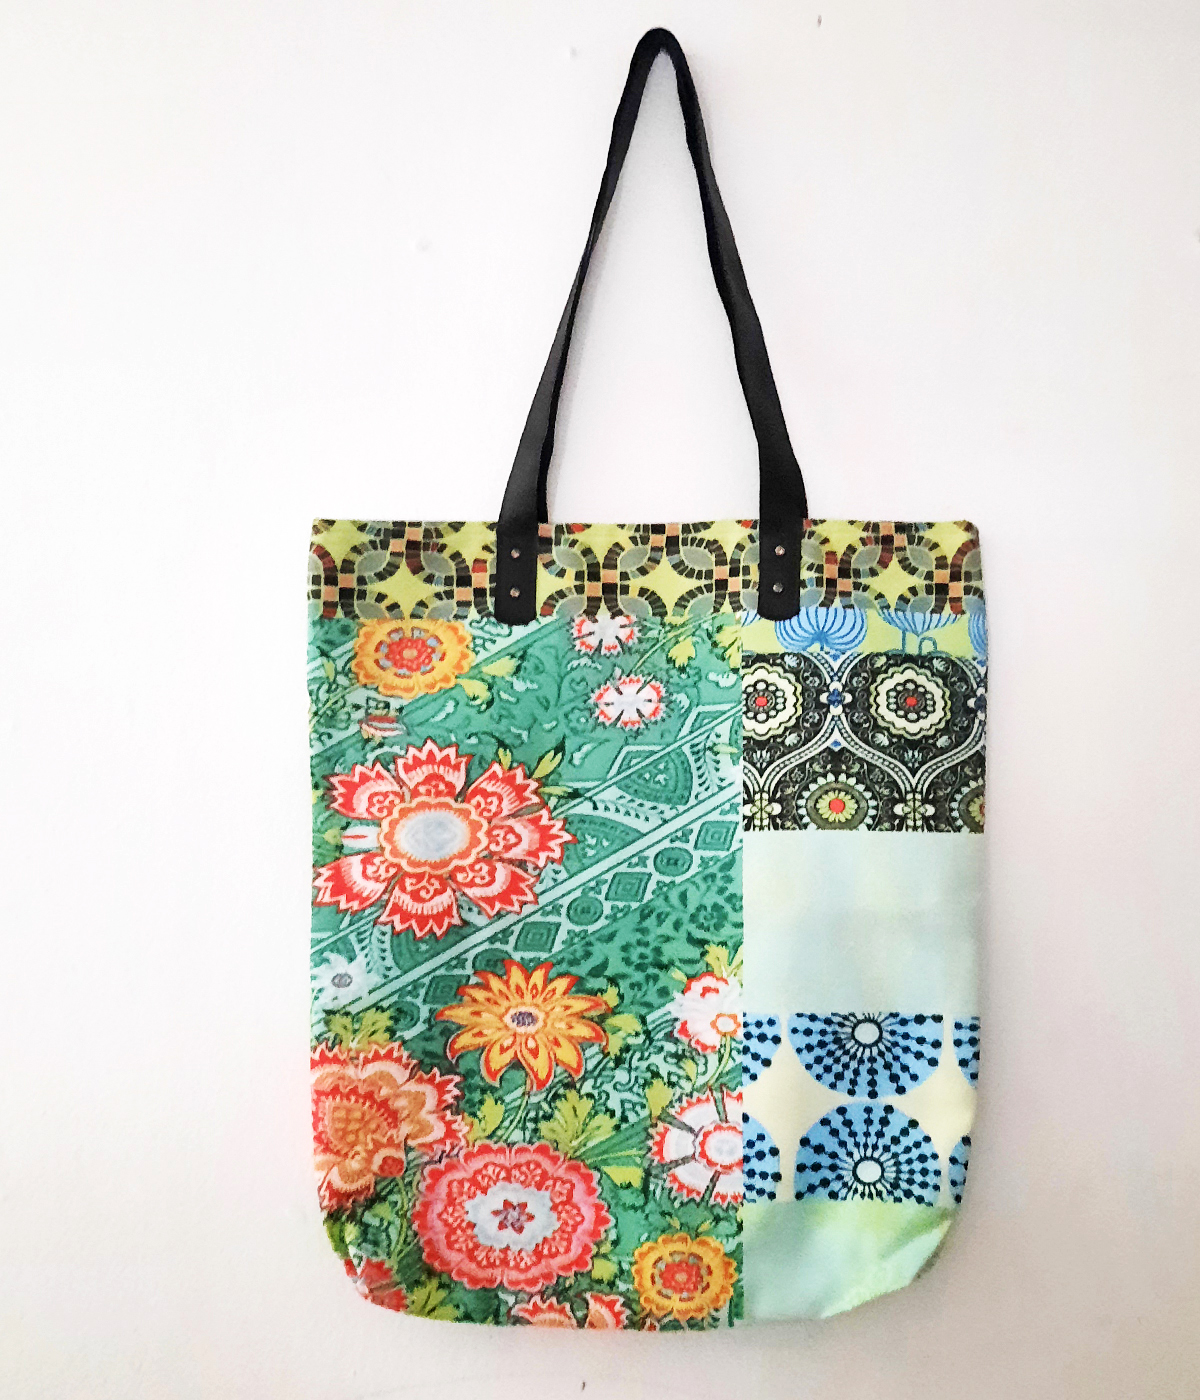 Canvas bags / Tote bags / Summer bag